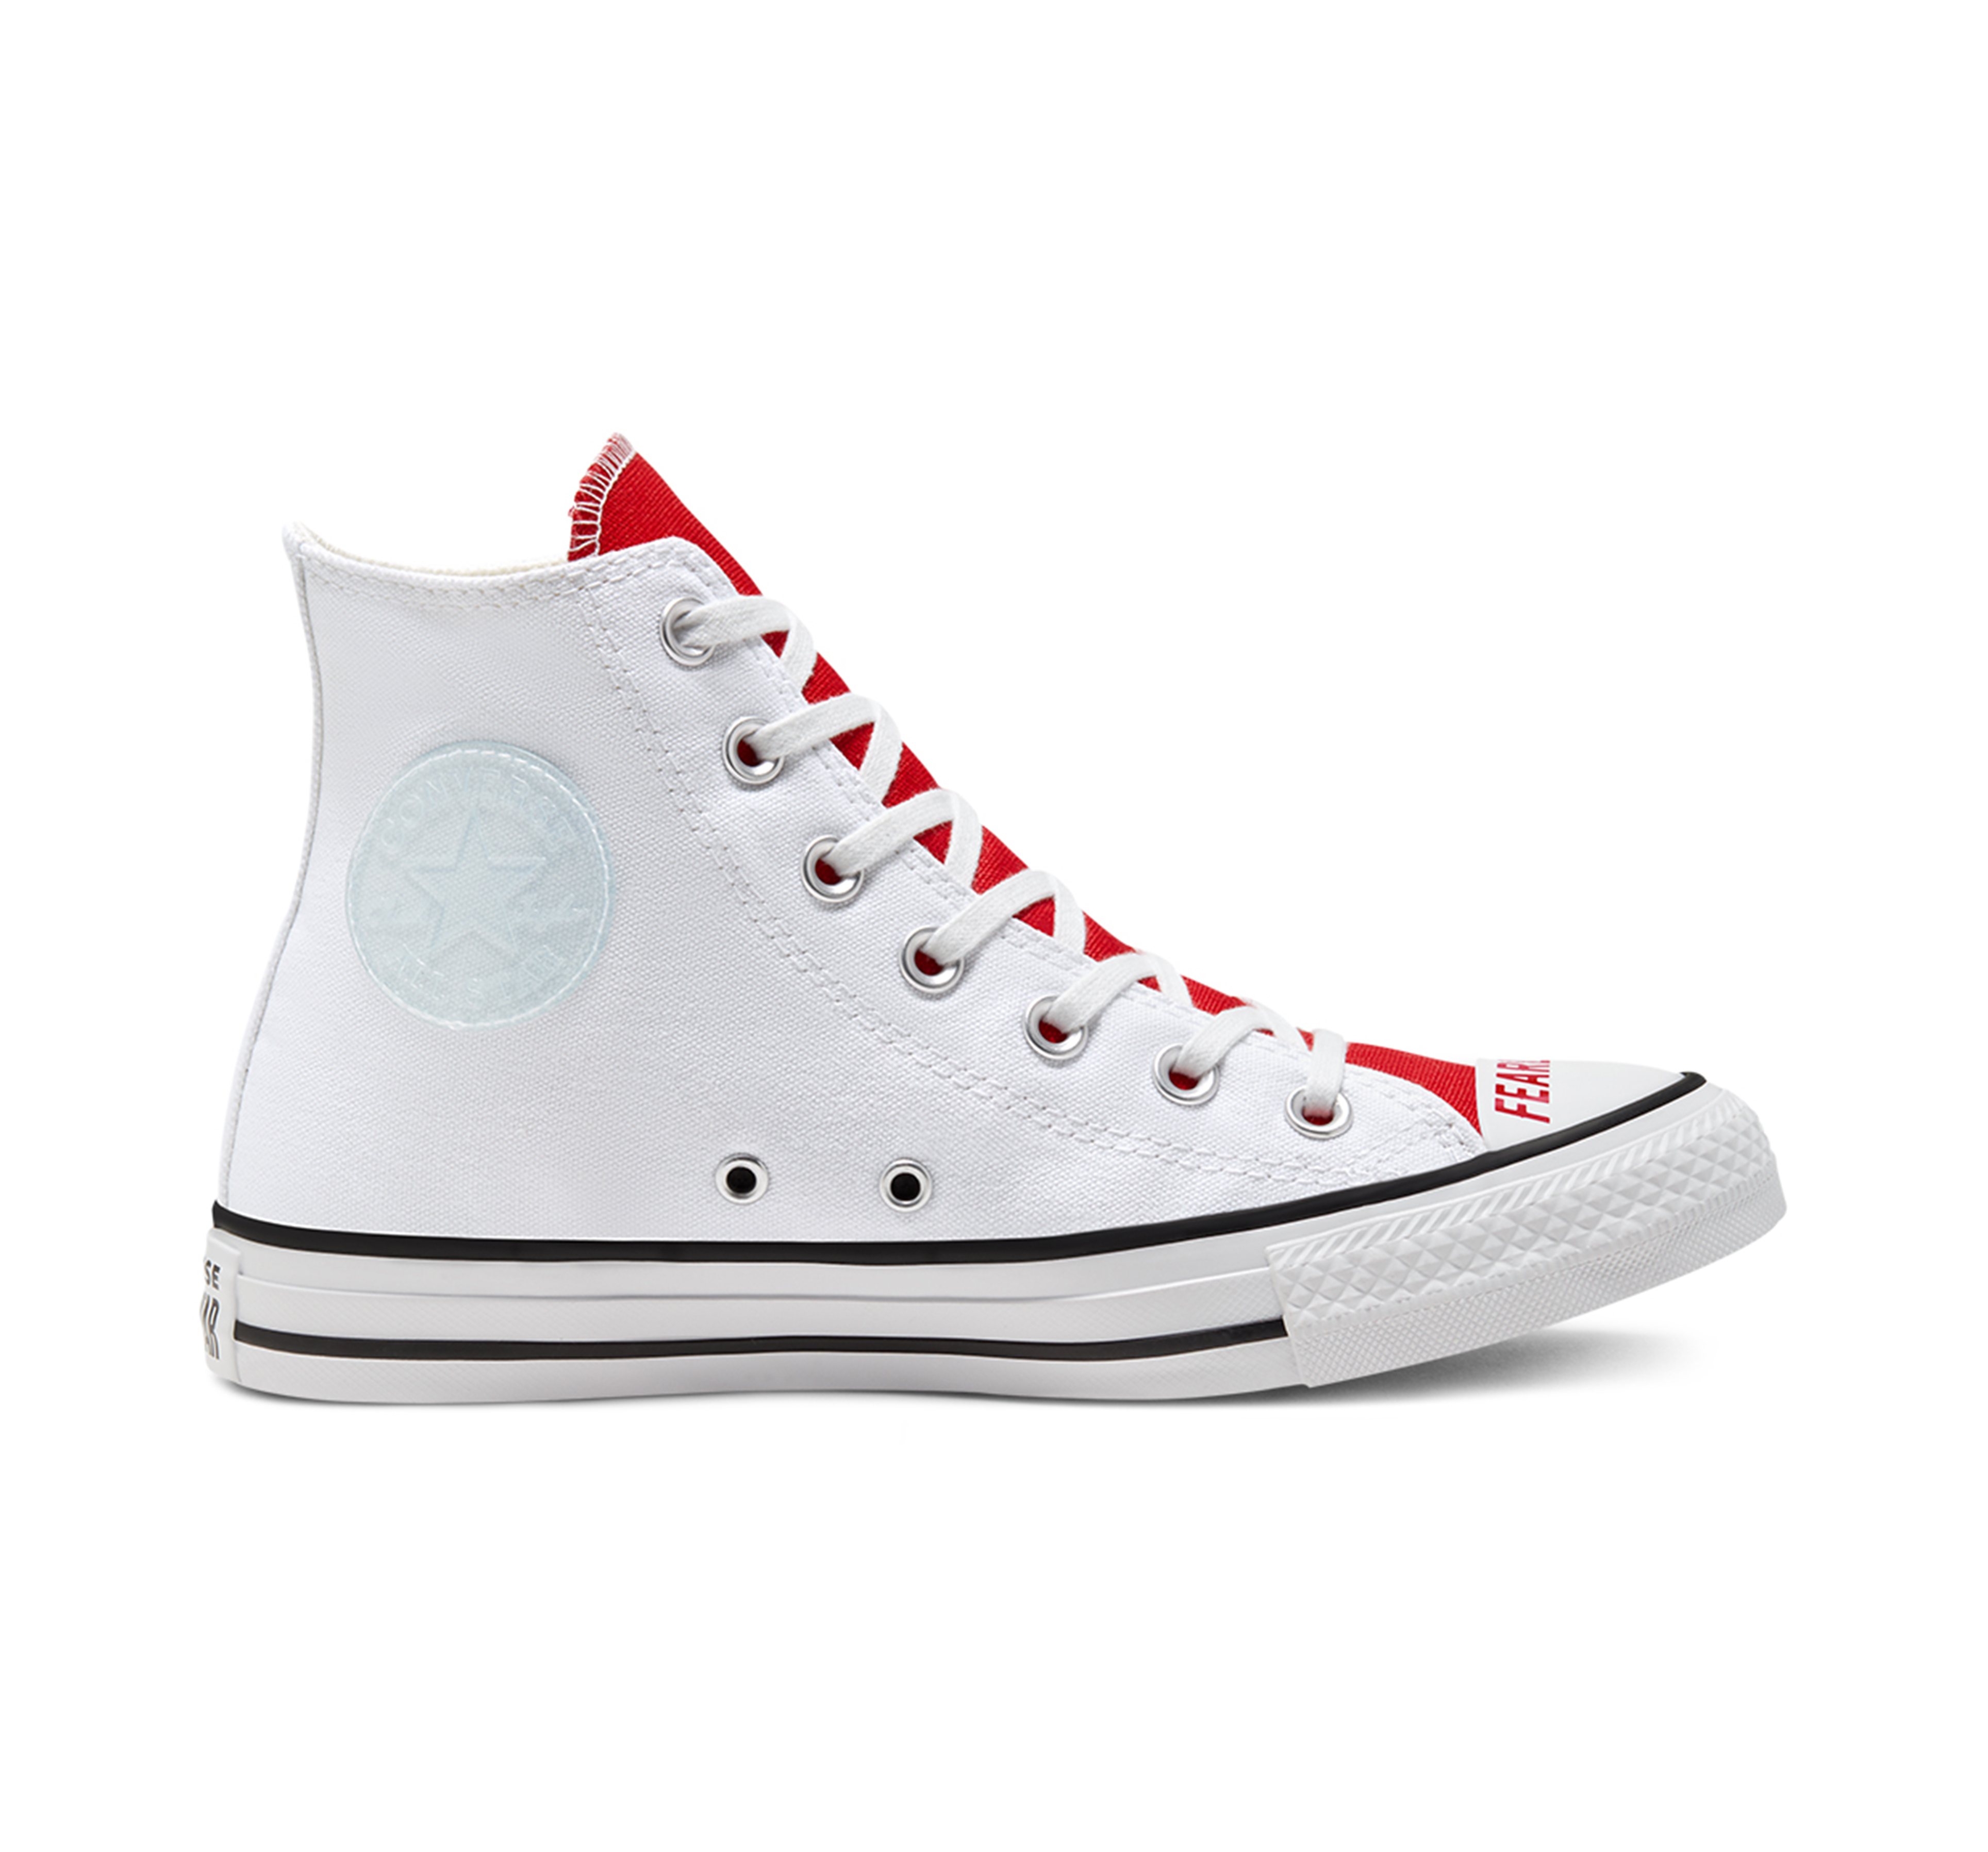 red and black converse all star